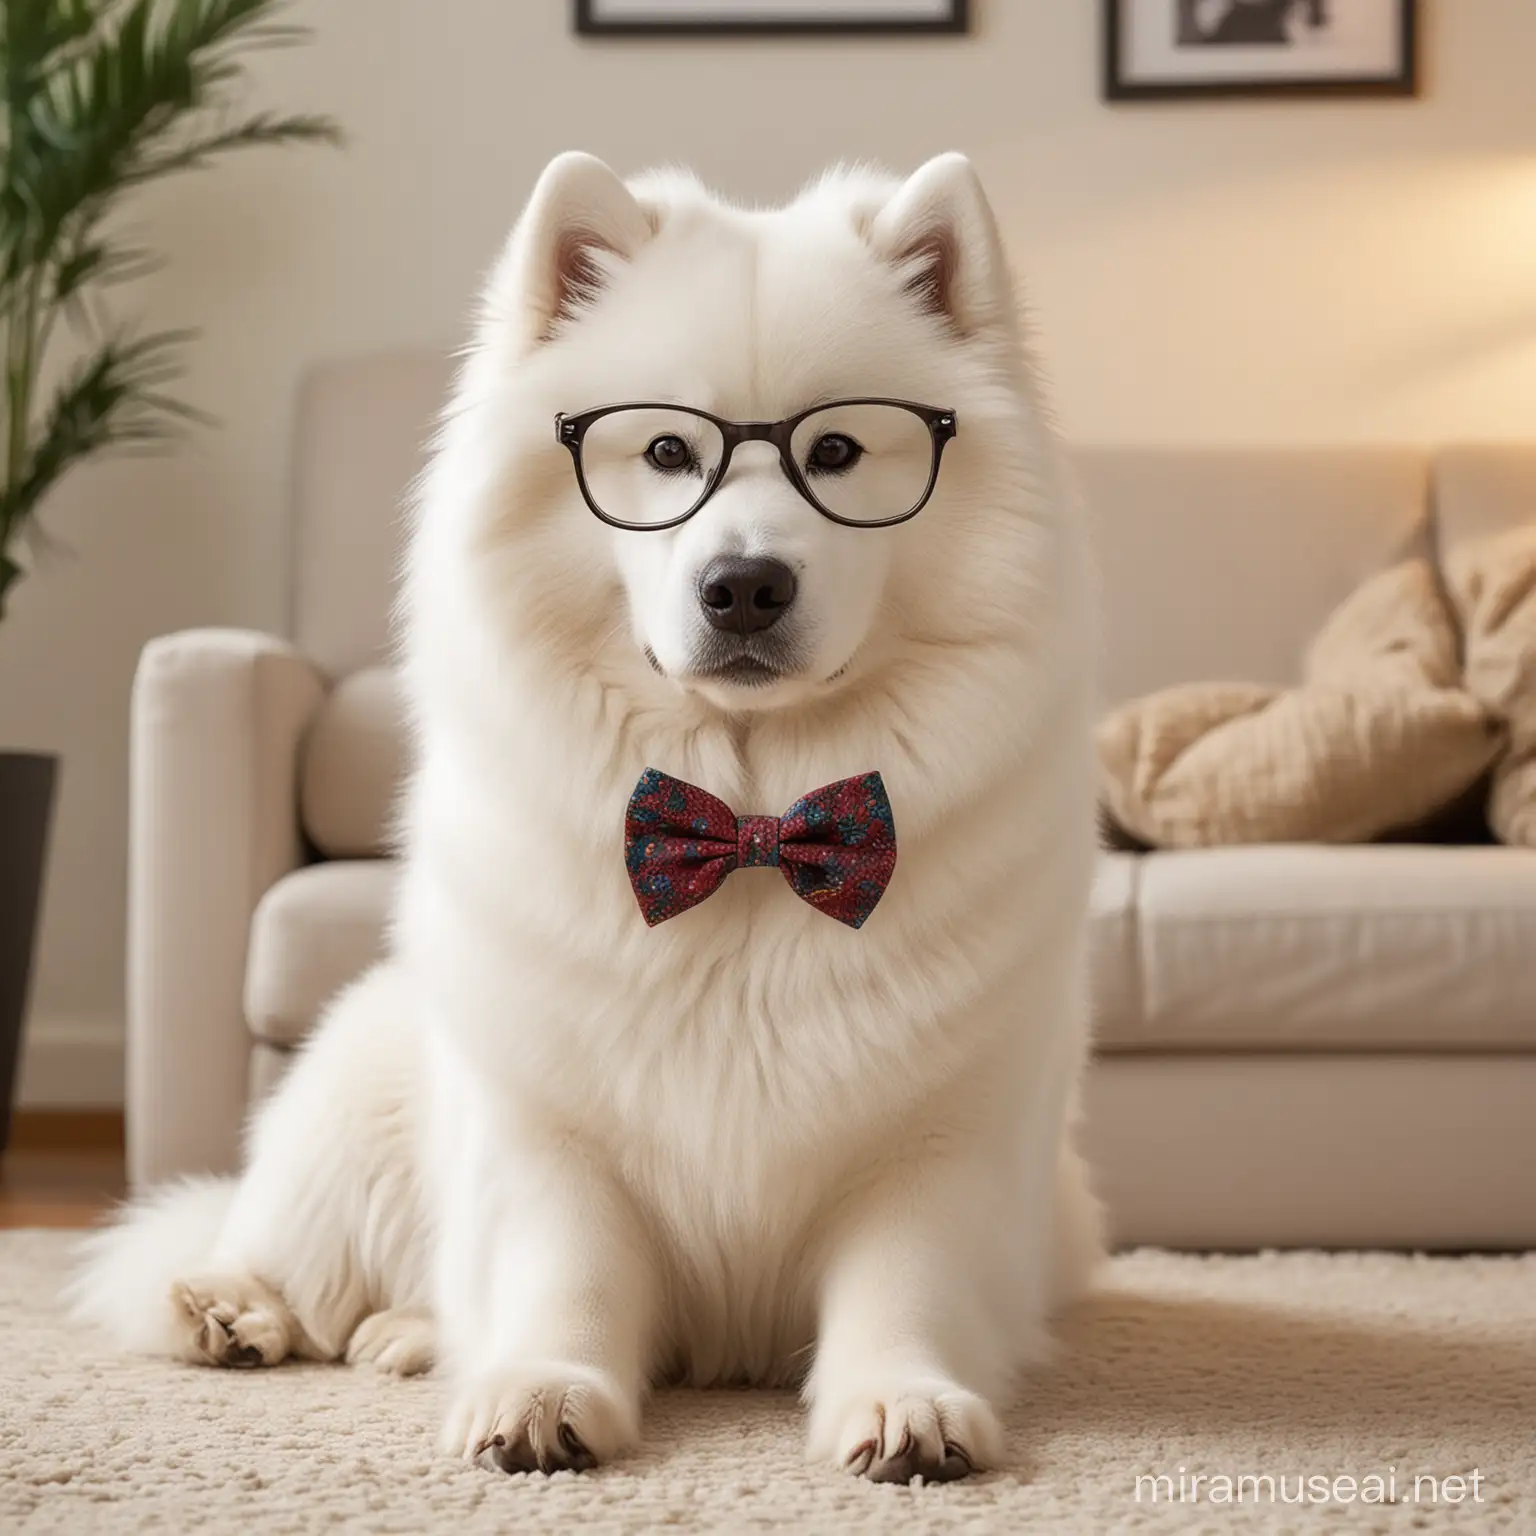 Stylish Samoyed Dog with Bow Tie and Glasses in Contemporary Home Setting